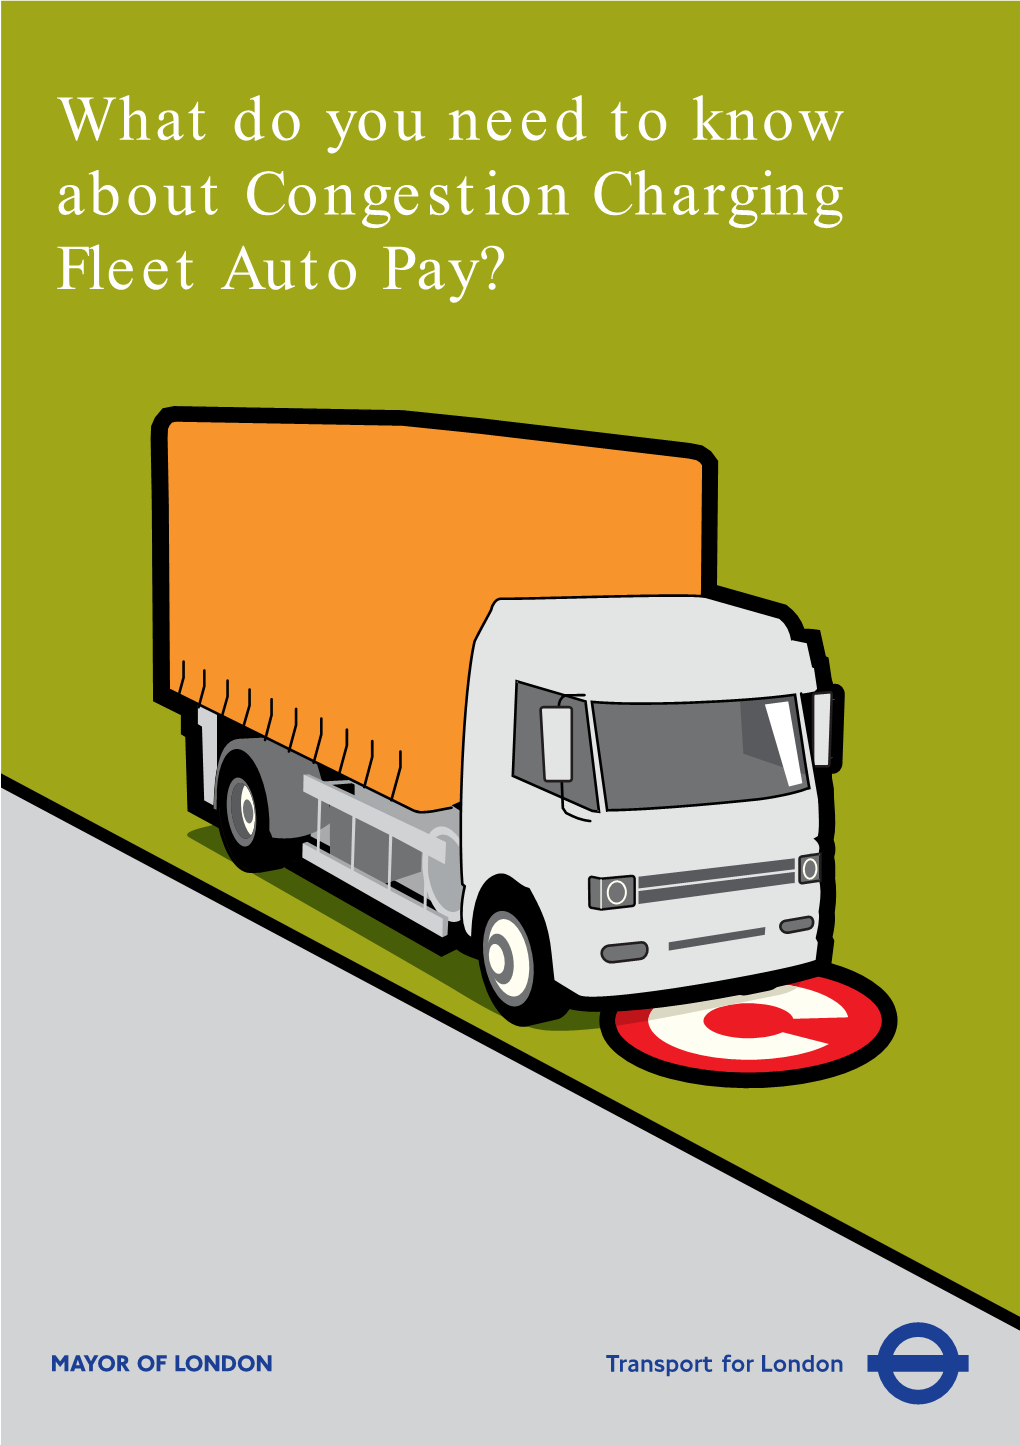 Fleet Auto Pay? Fleet Operators and the Congestion Charge Contents